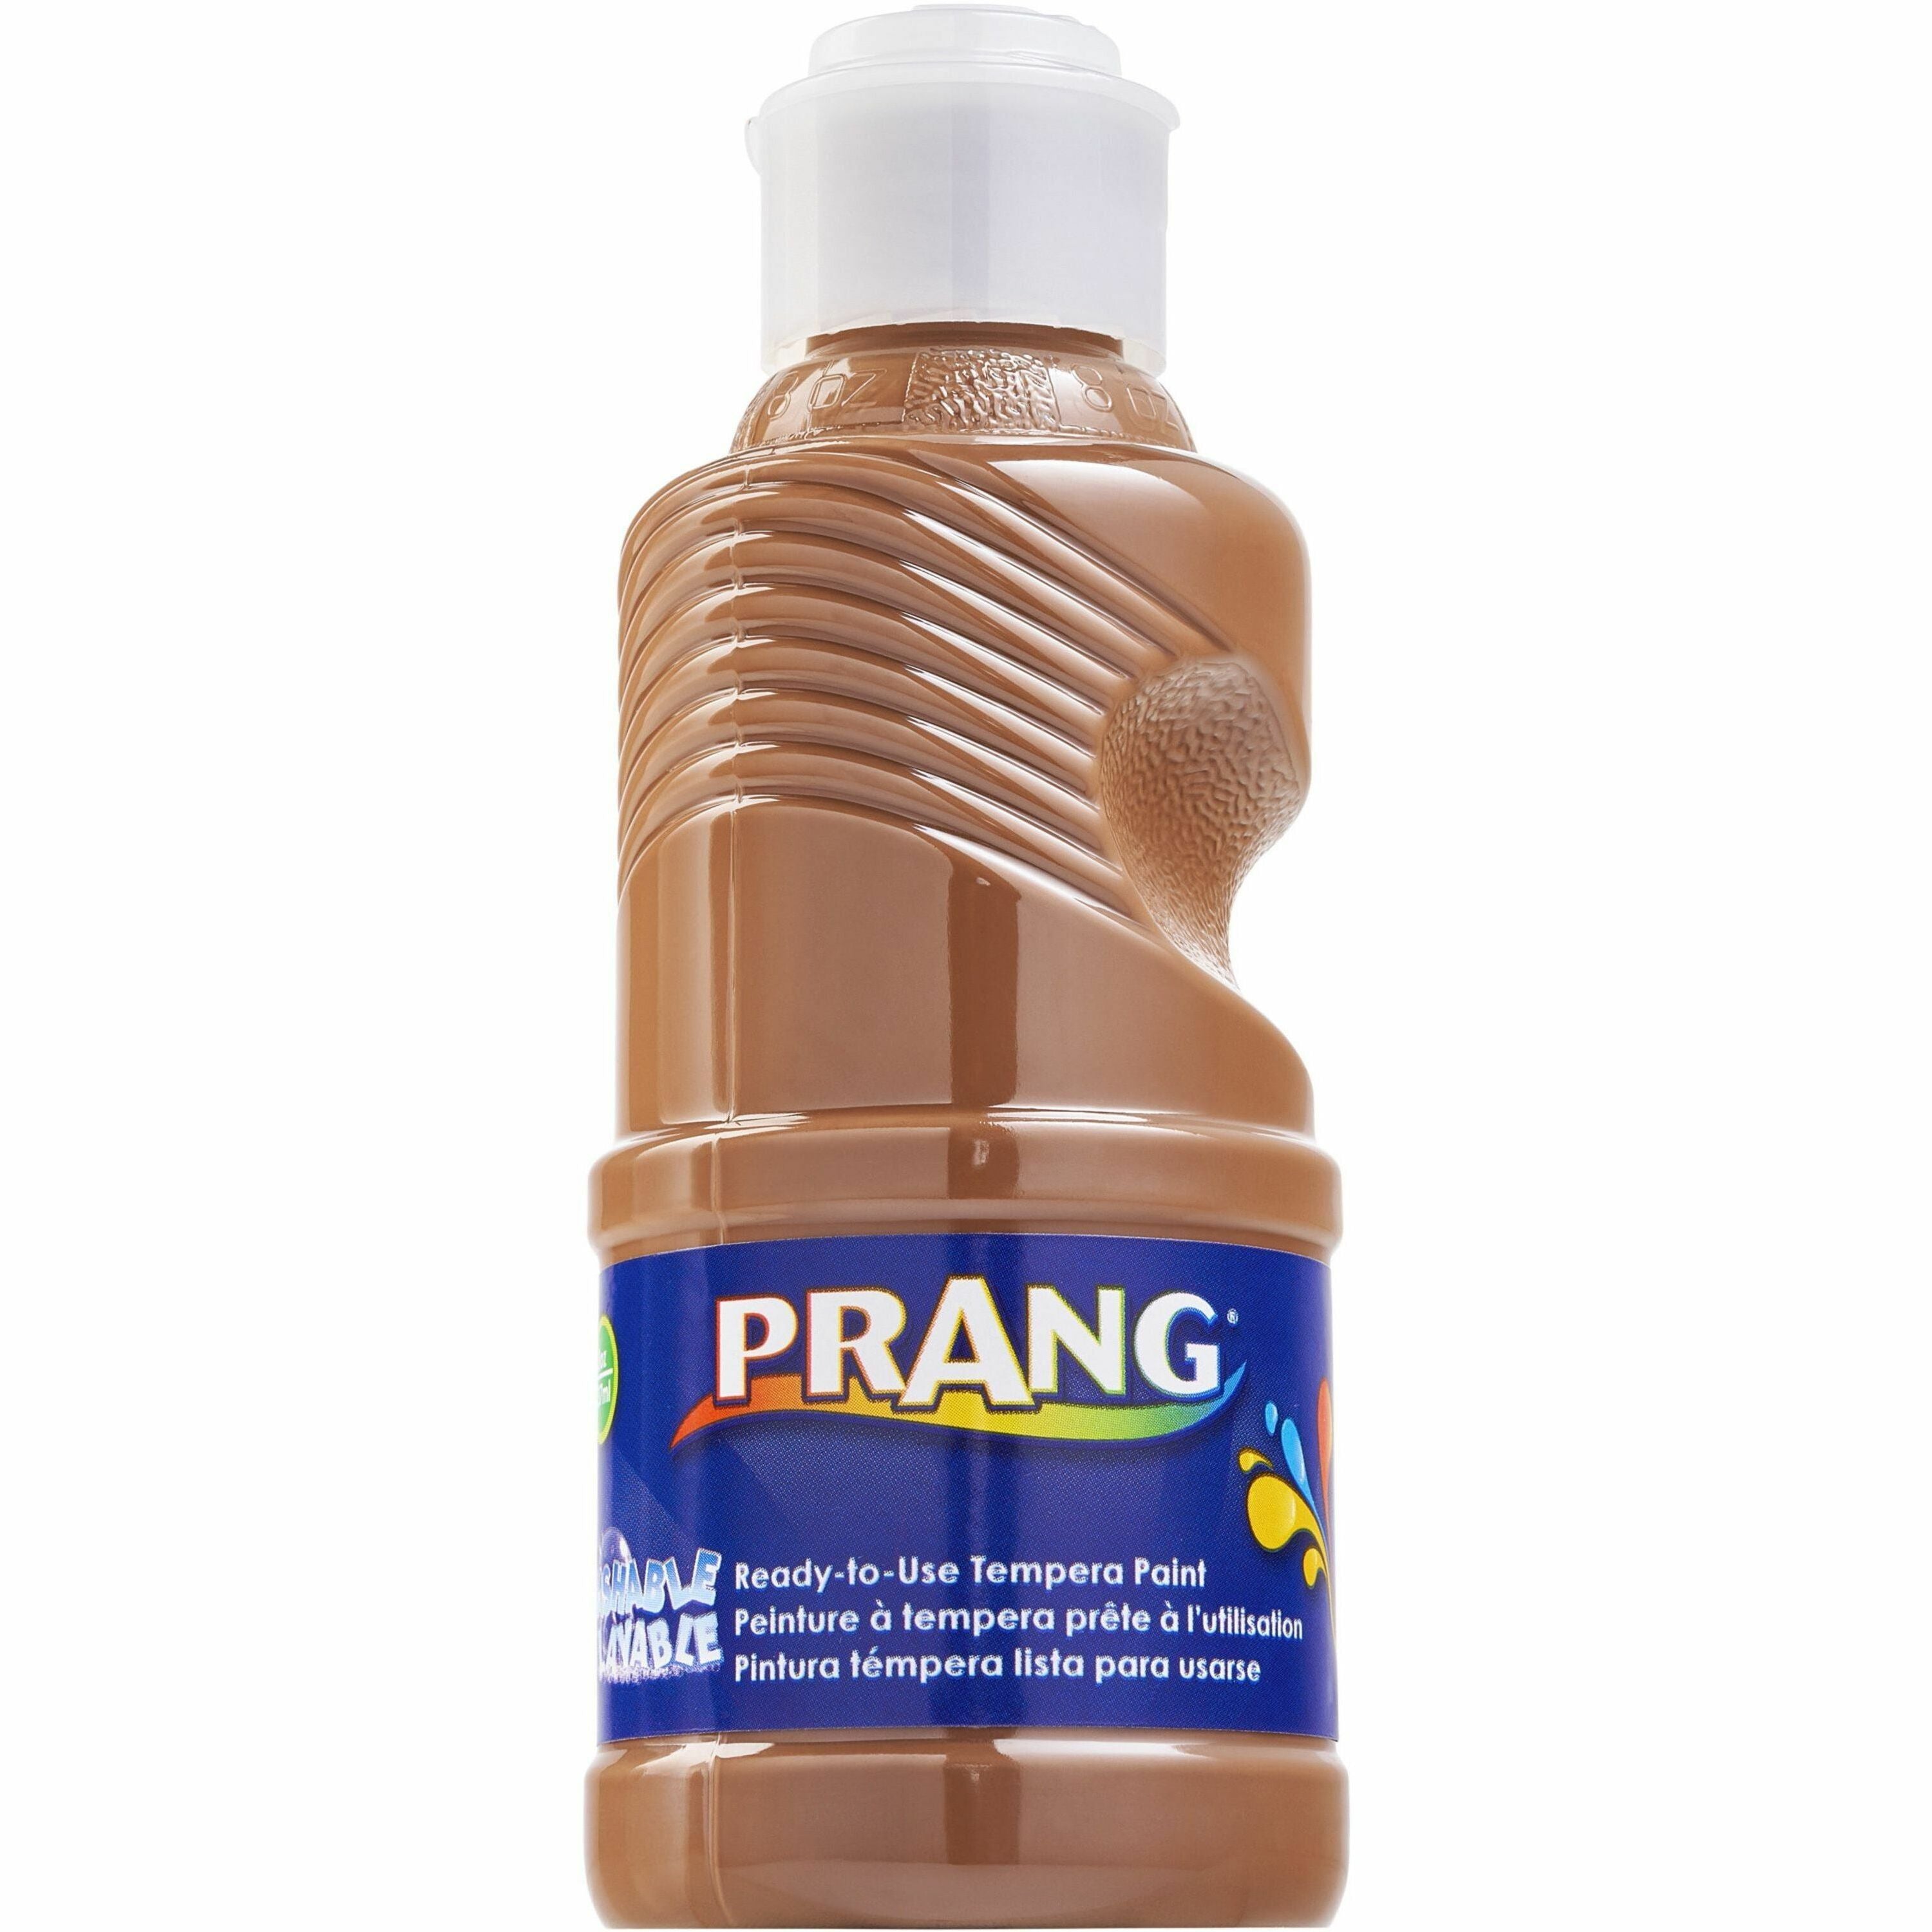 prang-ready-to-use-washable-tempera-paint-8-fl-oz-1-each-brown_dixx10808 - 1